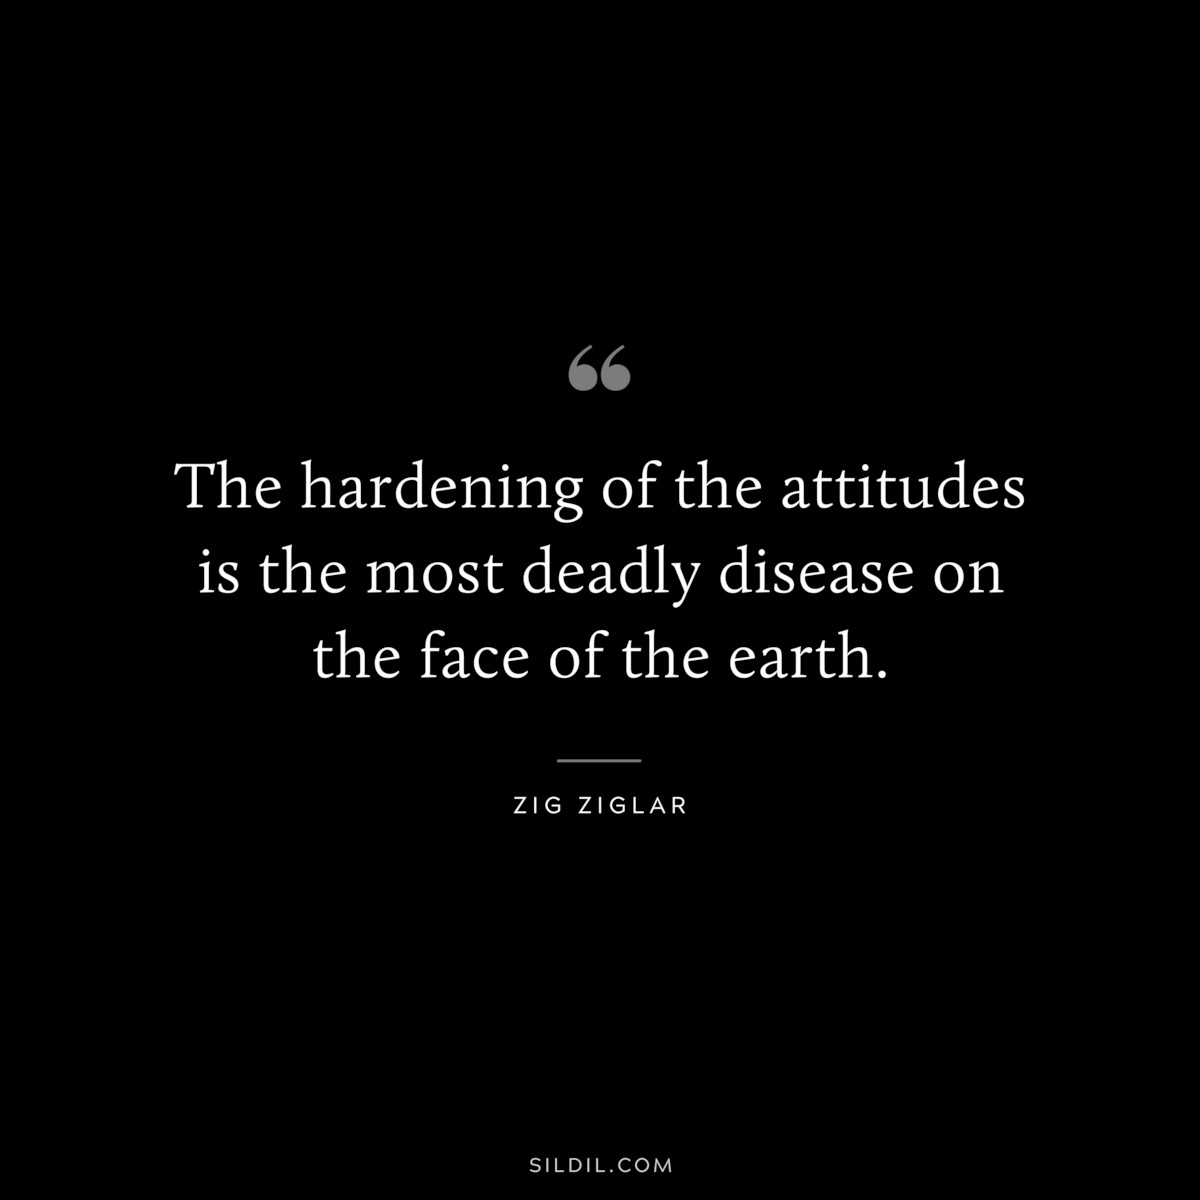 The hardening of the attitudes is the most deadly disease on the face of the earth. ― Zig Ziglar